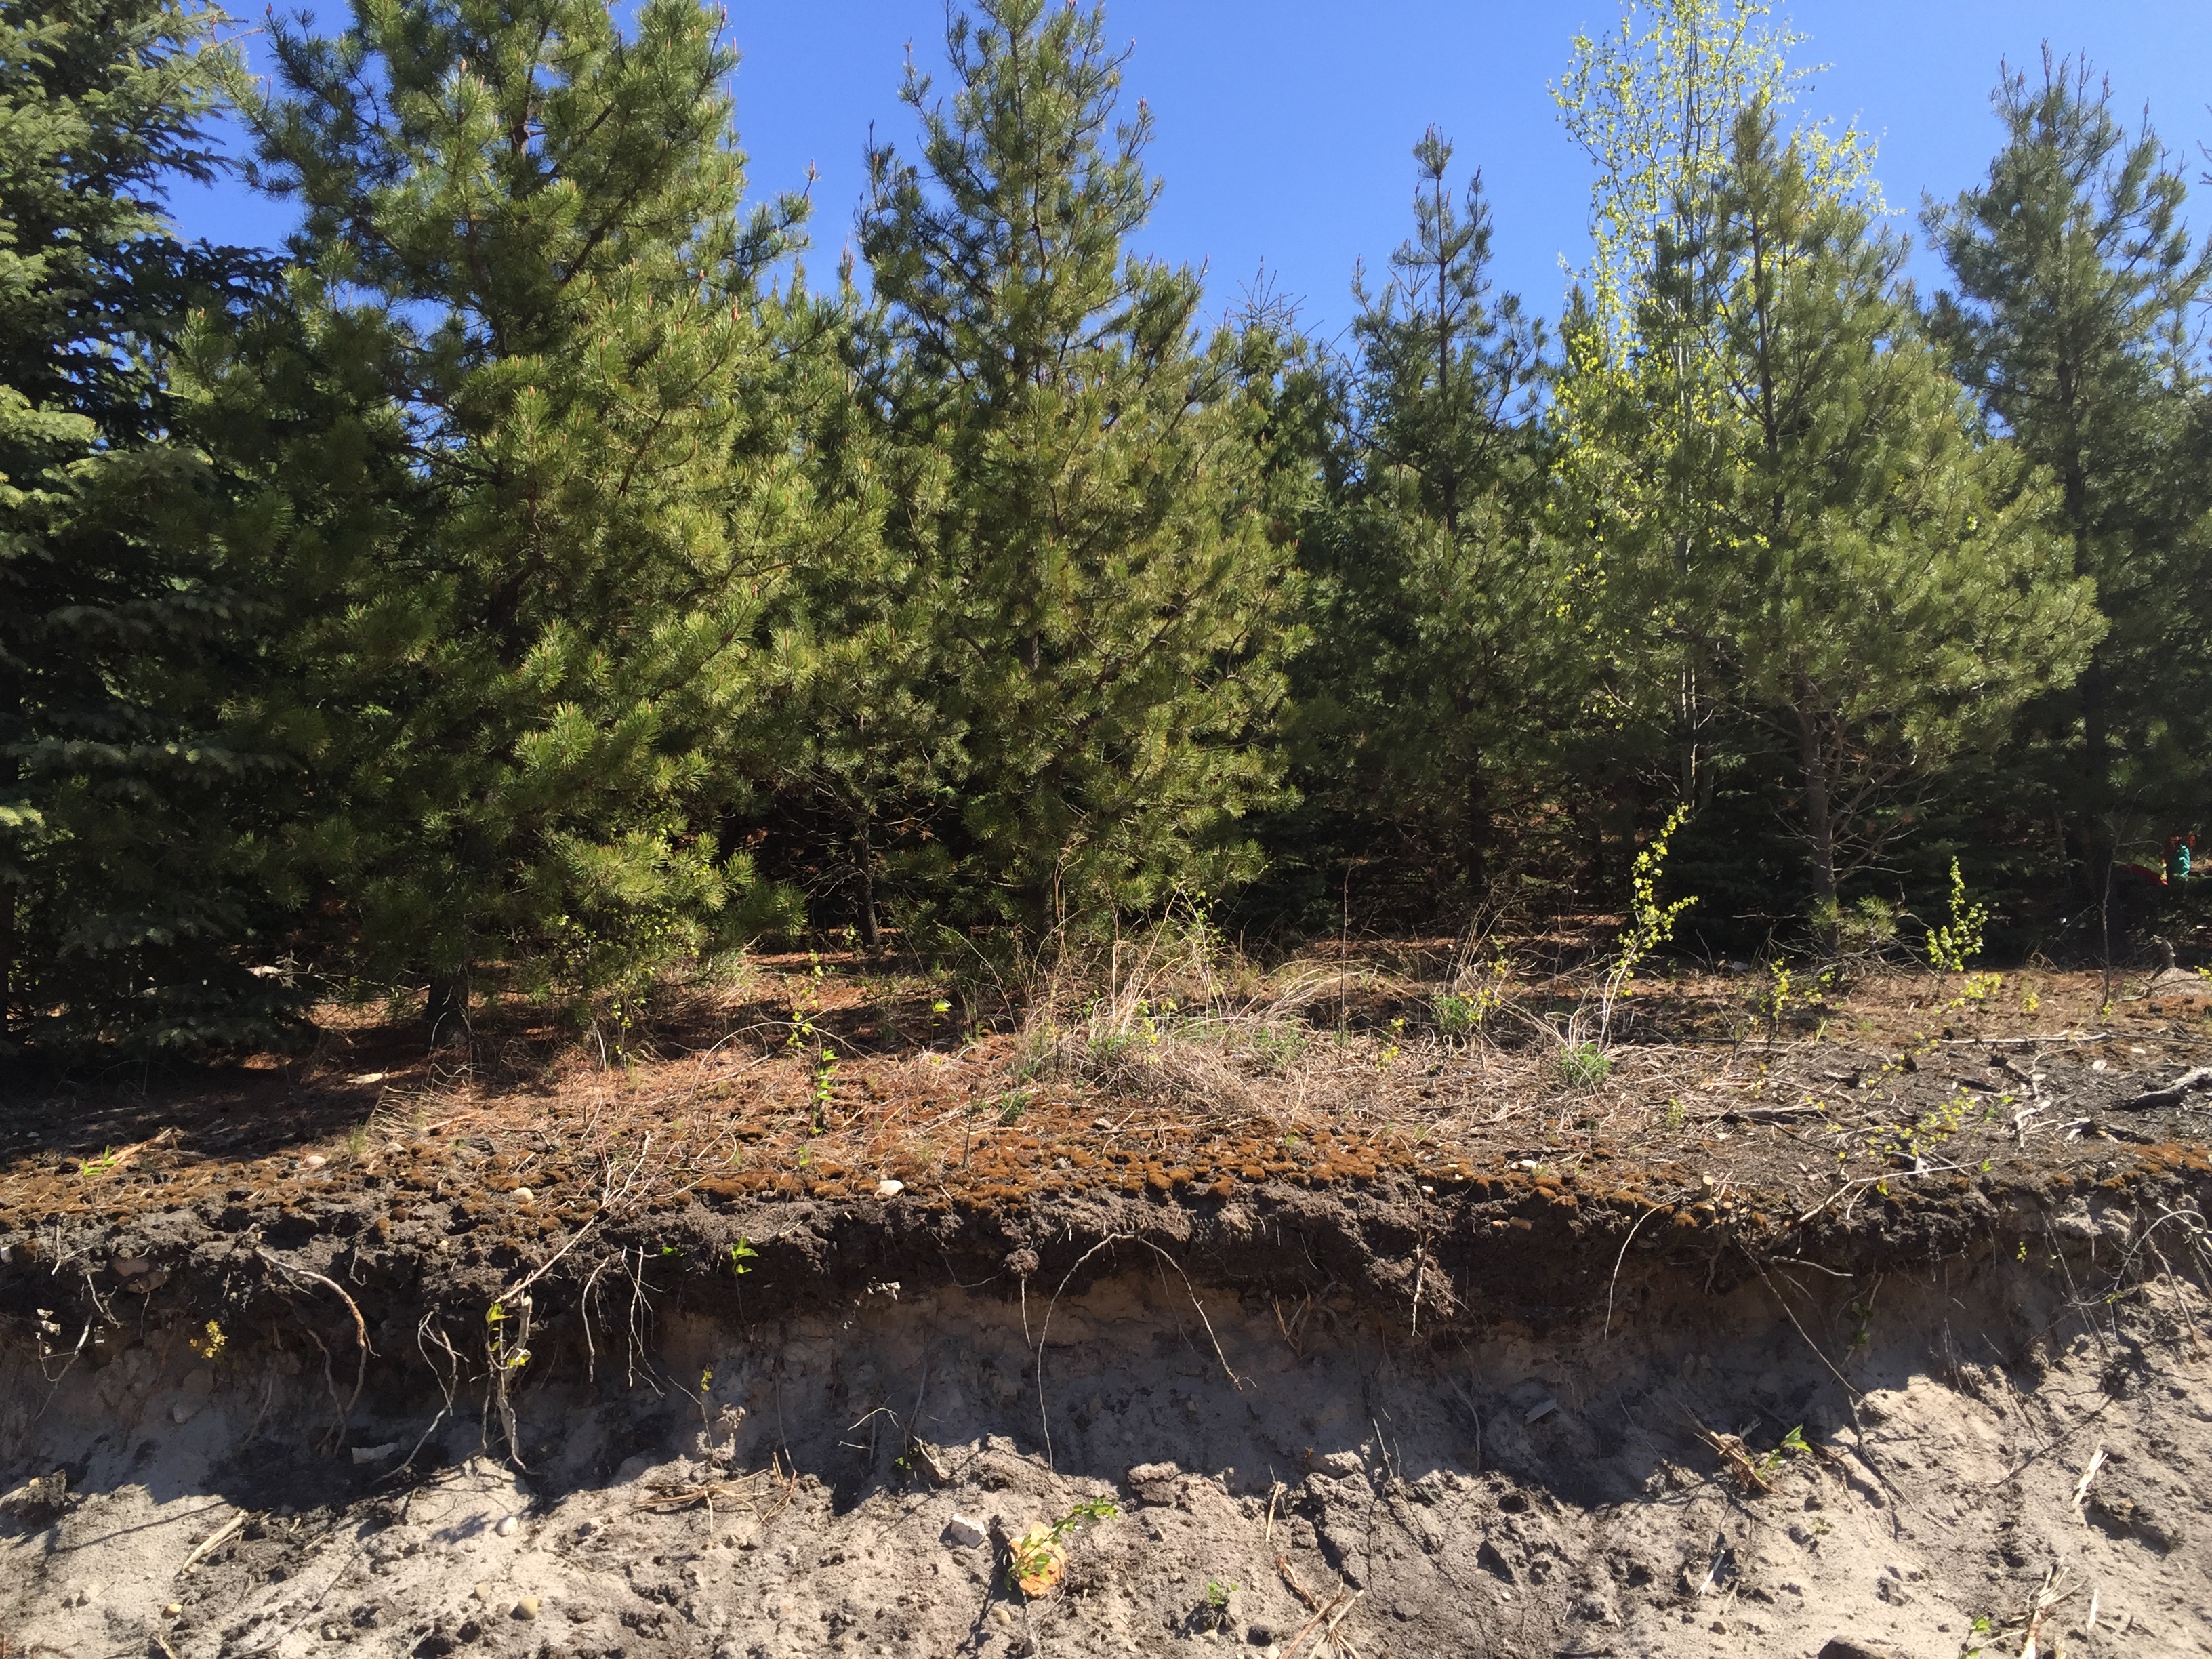 A cut away view of an engineered soil cap covering tailing sands, supporting advanced pine tree regeneration